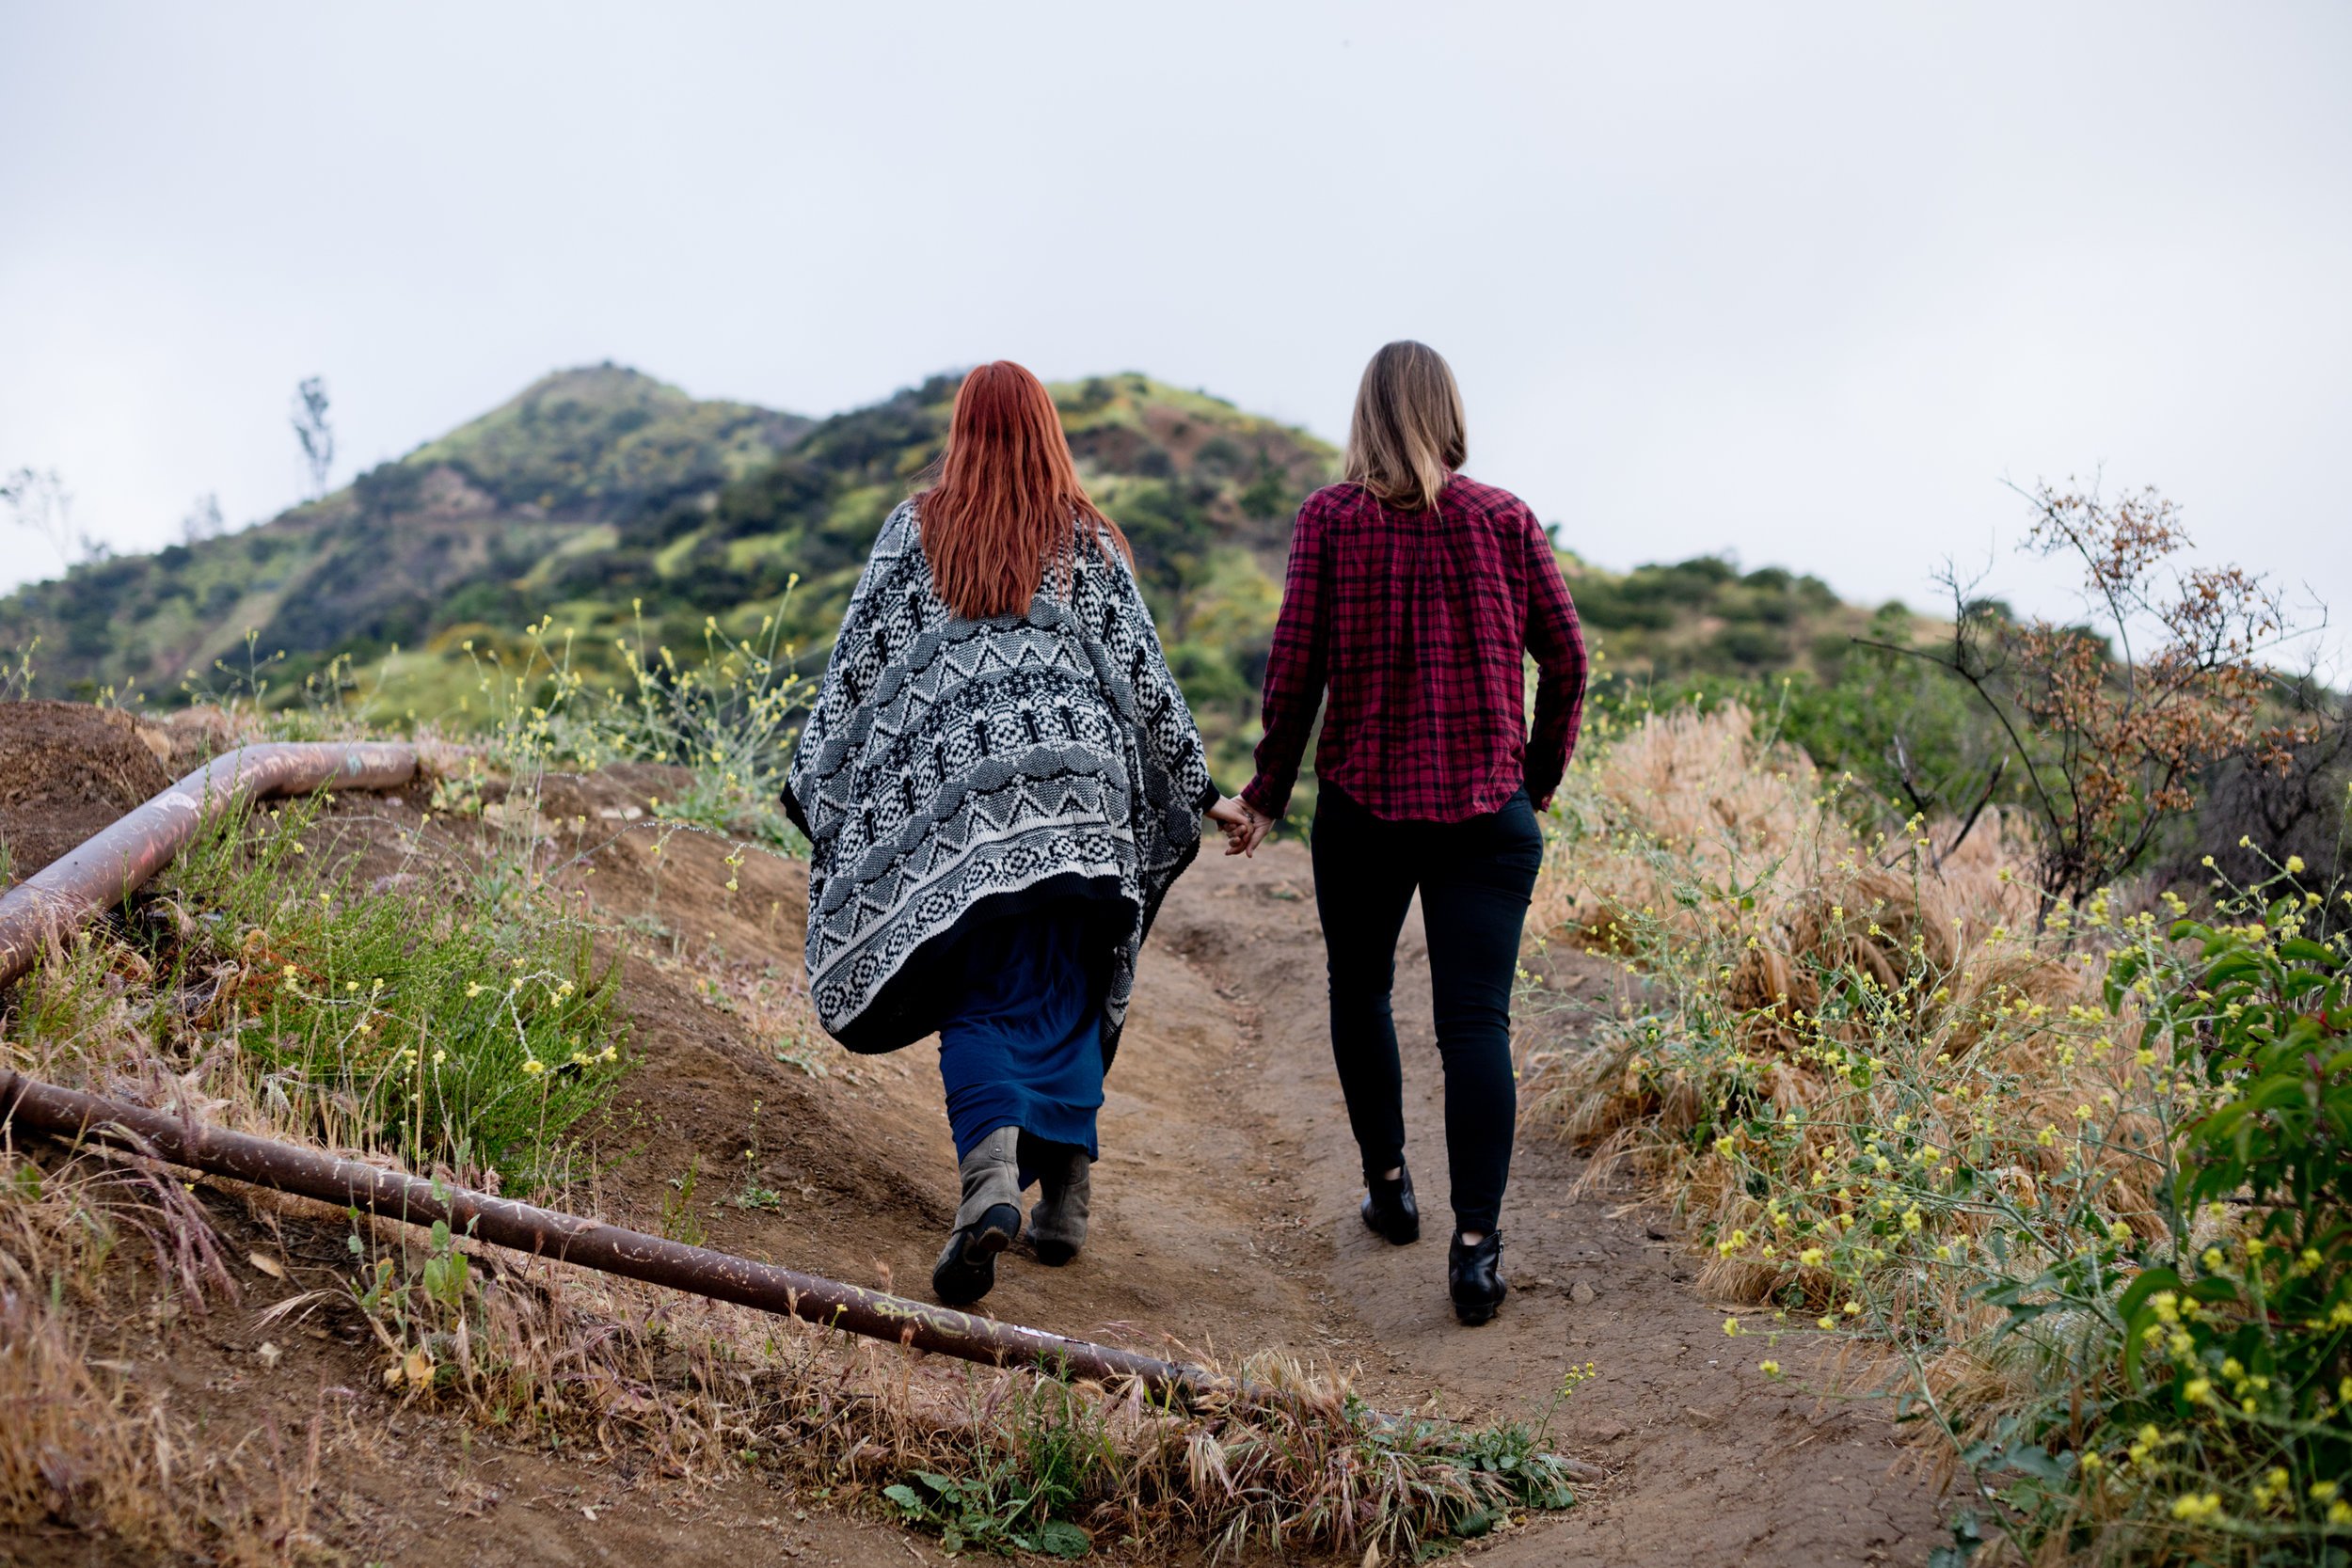 Courtney &amp; Tierney walking up a hiking trail away with their backs to the camera, holding hands